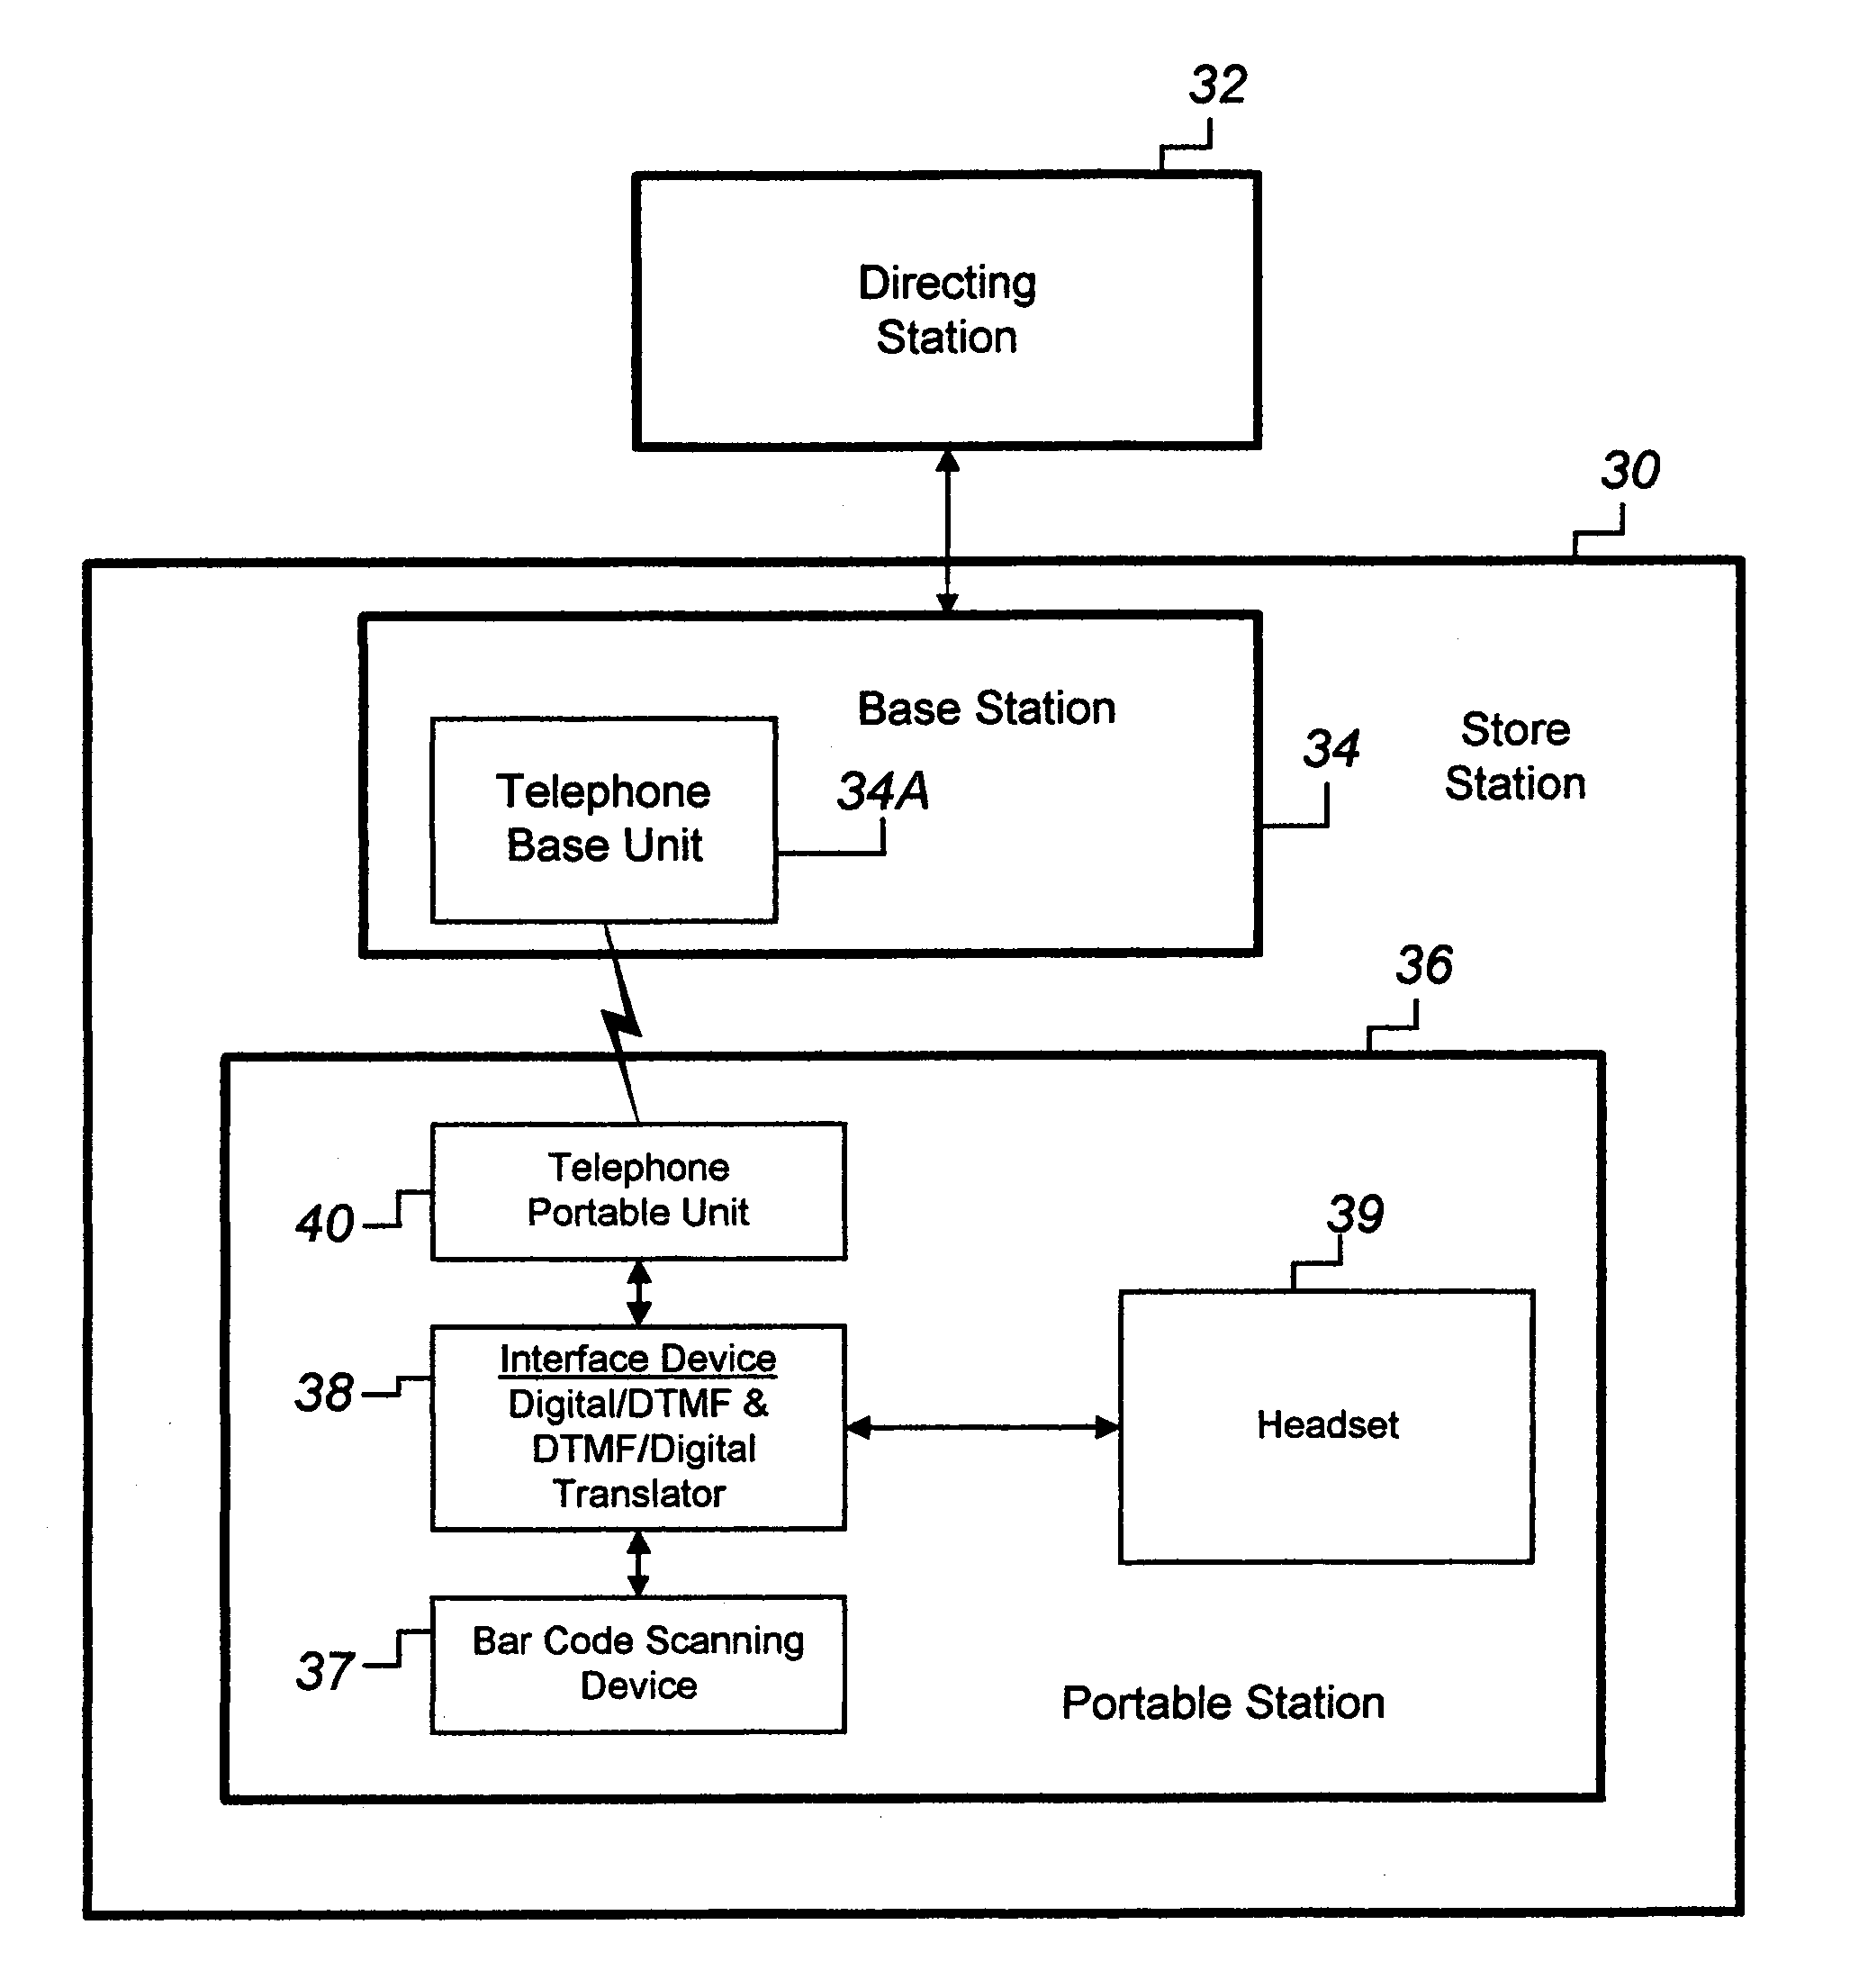 System for merchandise ordering and order fulfillment